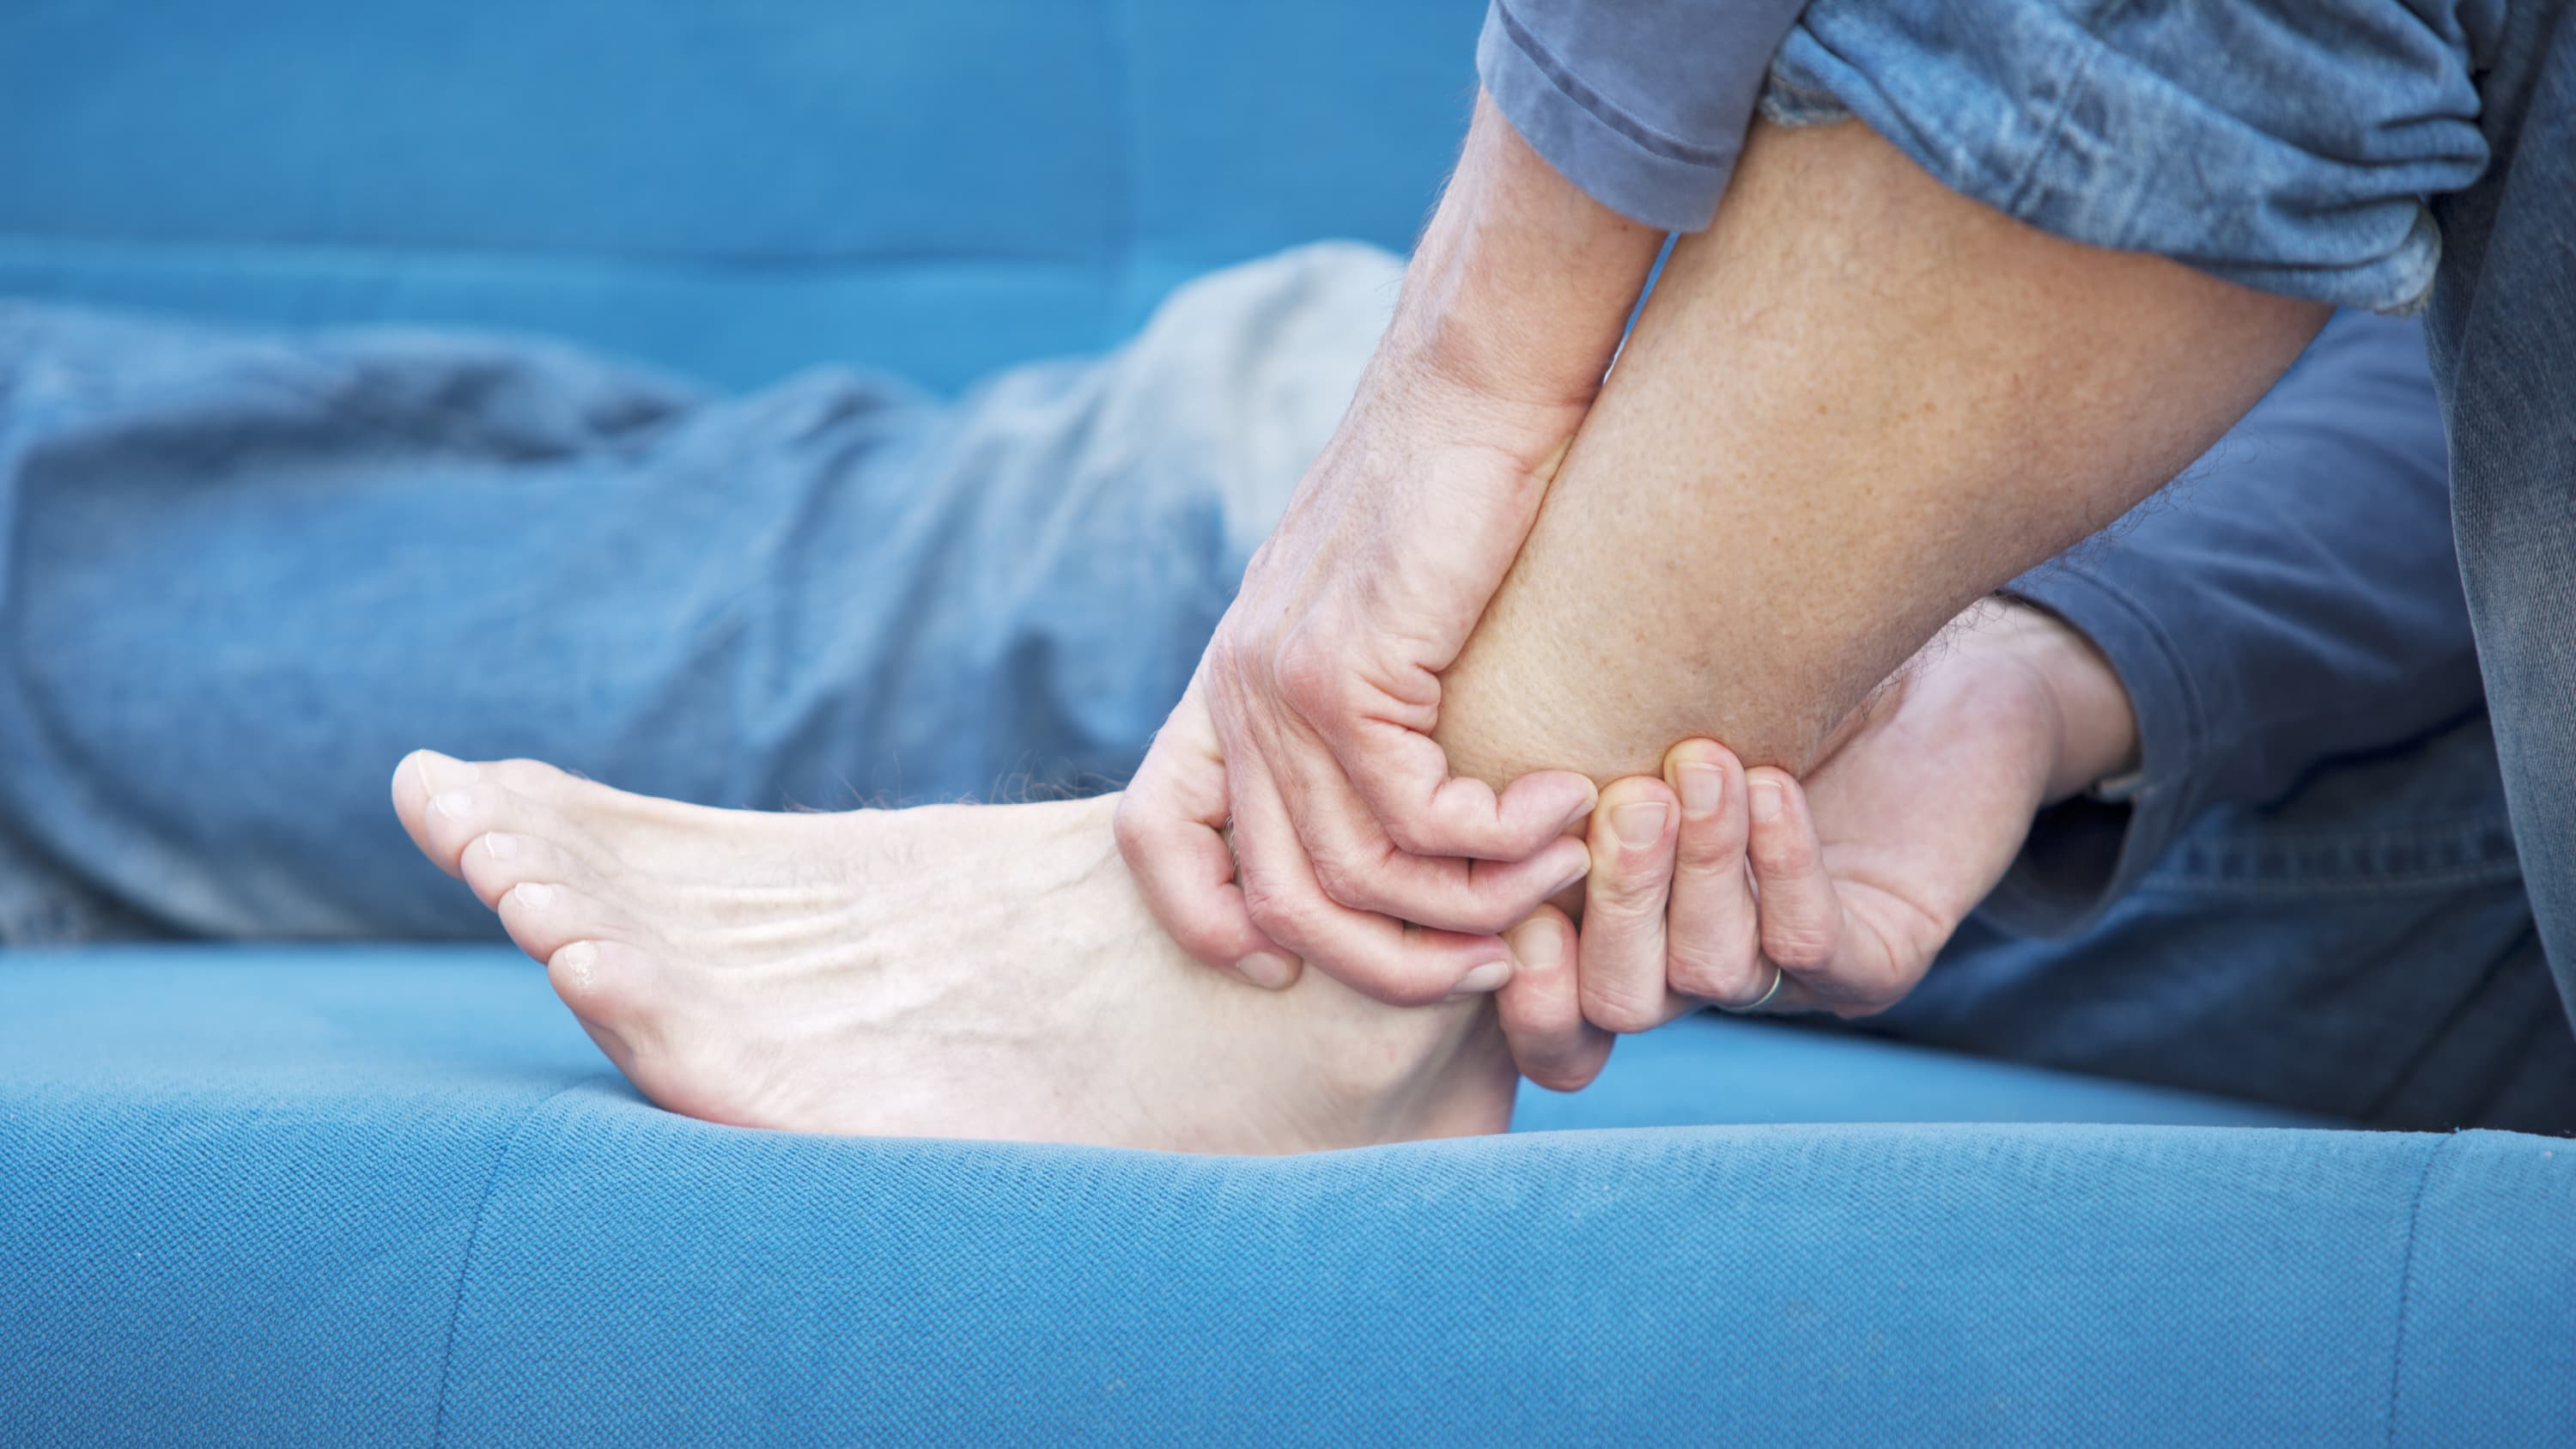 A man with lupus nephritis gripping his ankle on a blue couch.